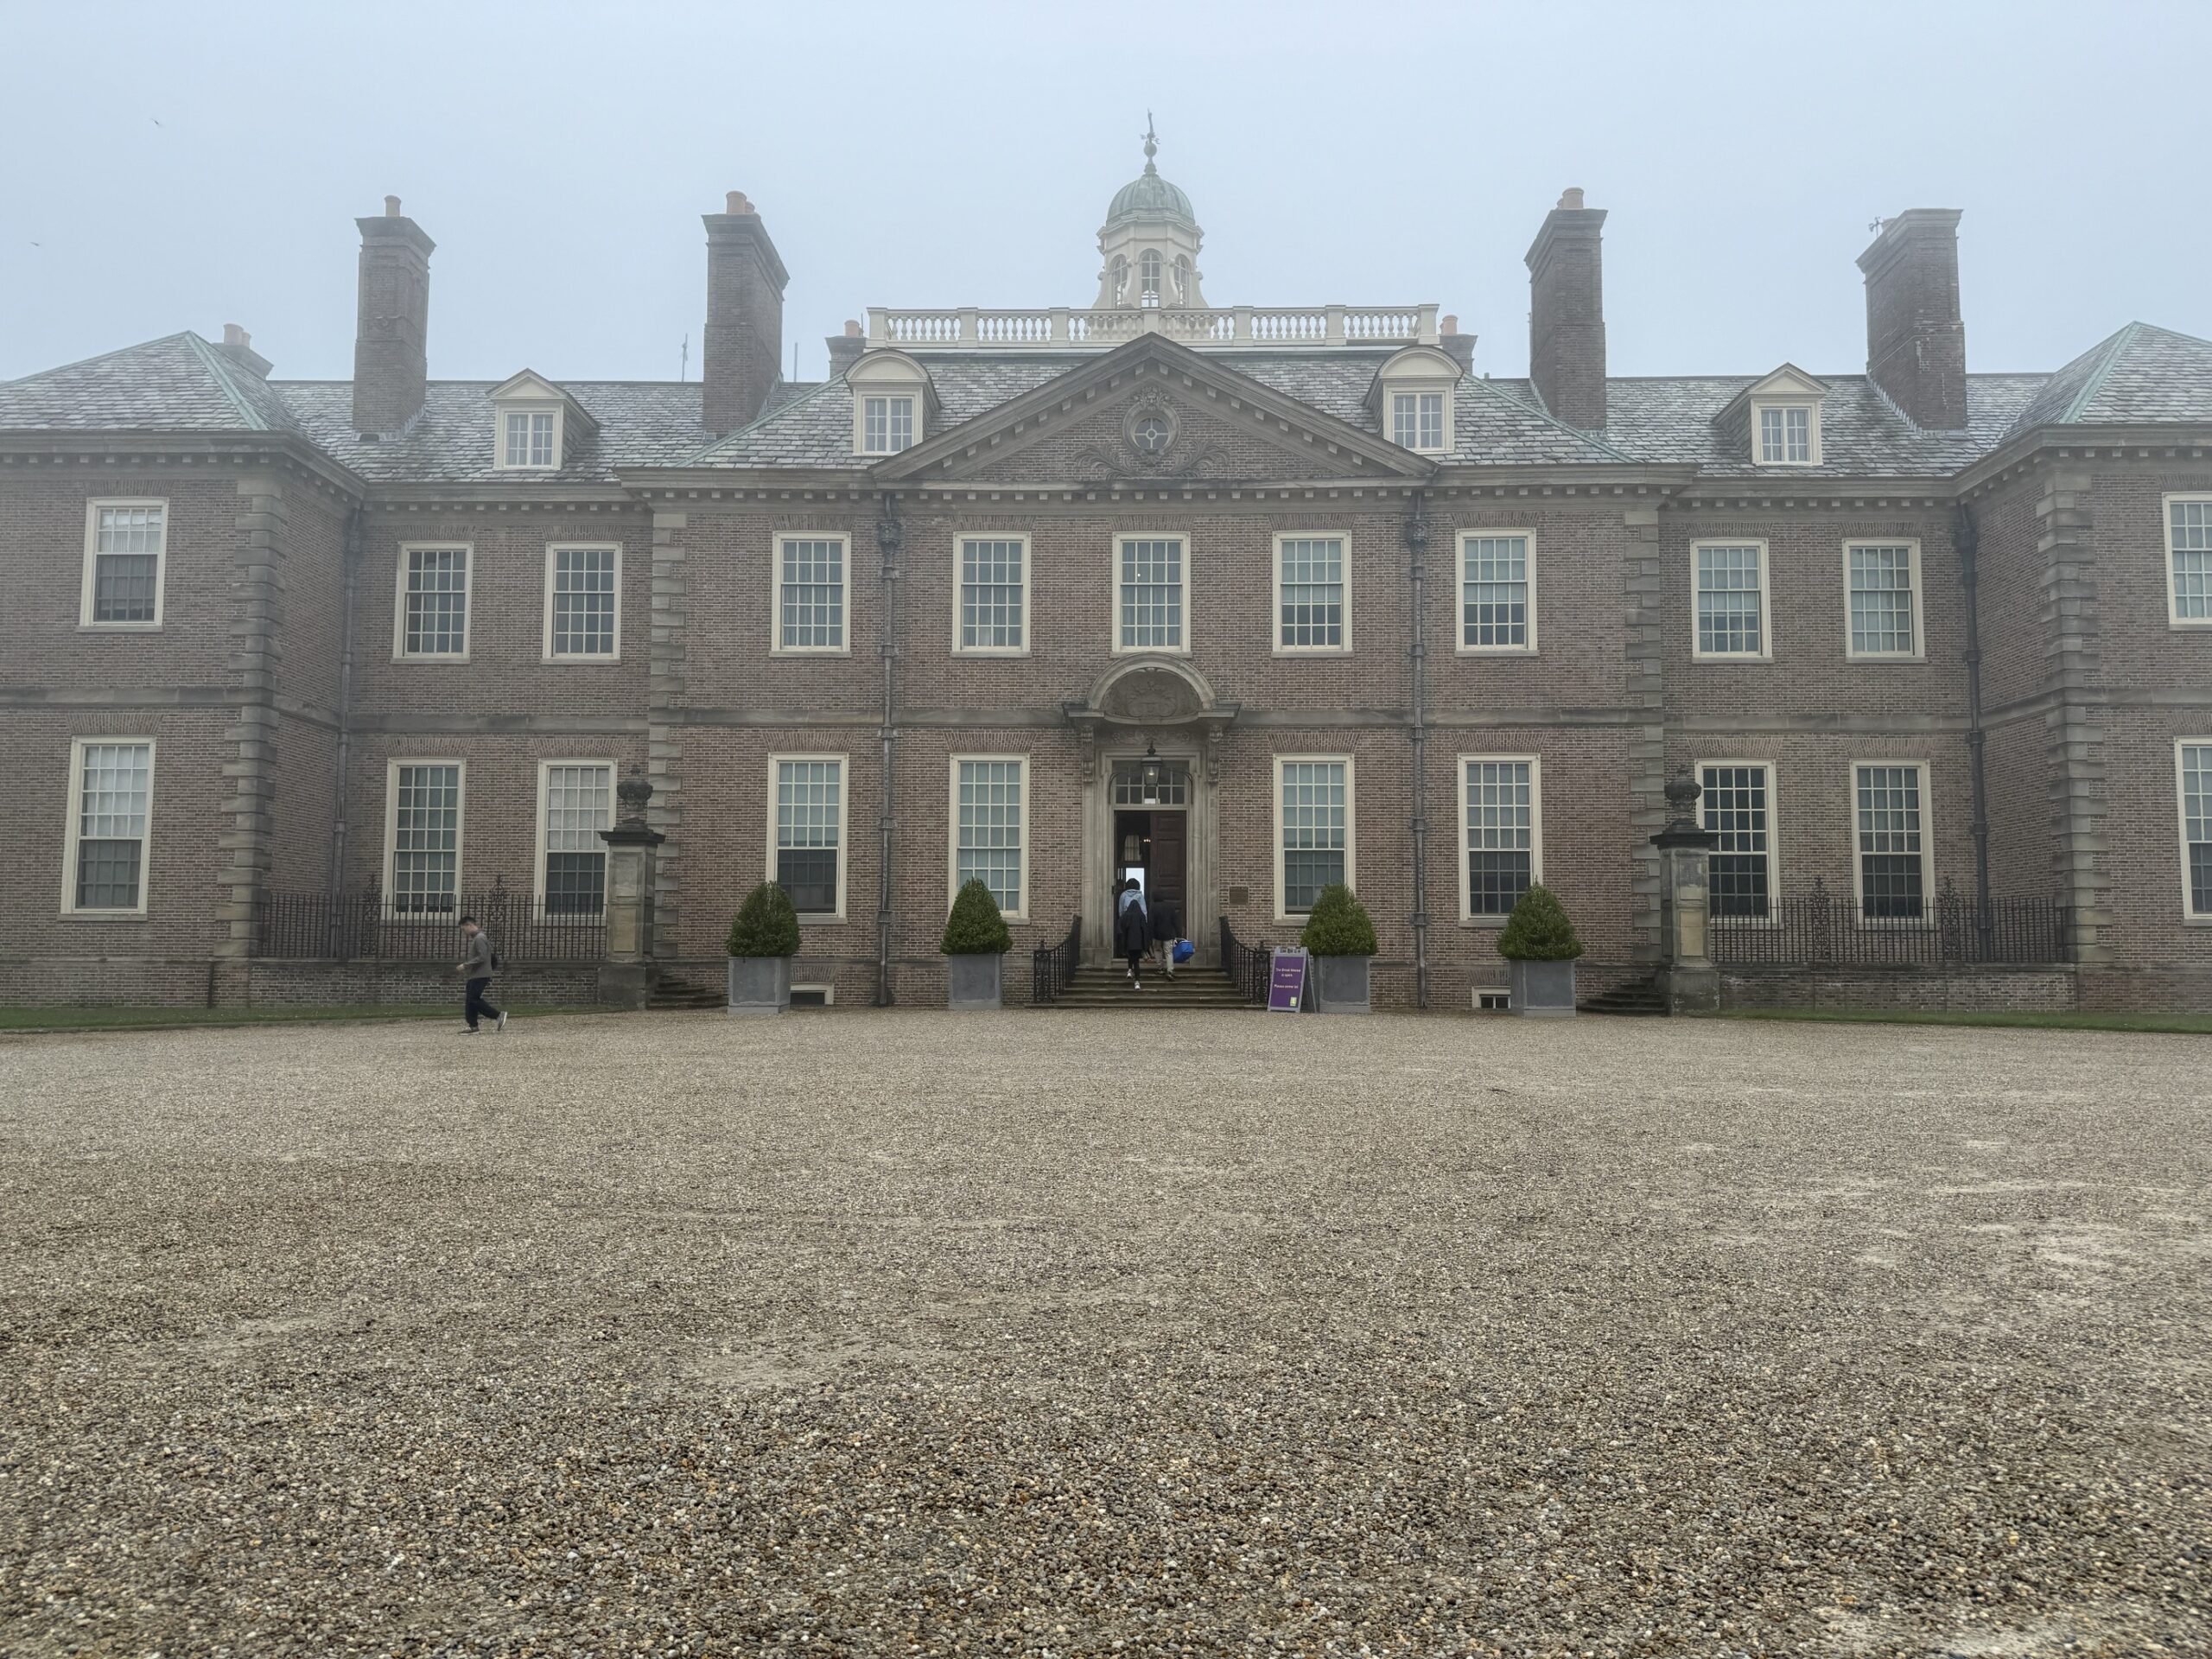 A large estate made of stone is pictured with a pebbled drive on a foggy and grey day.